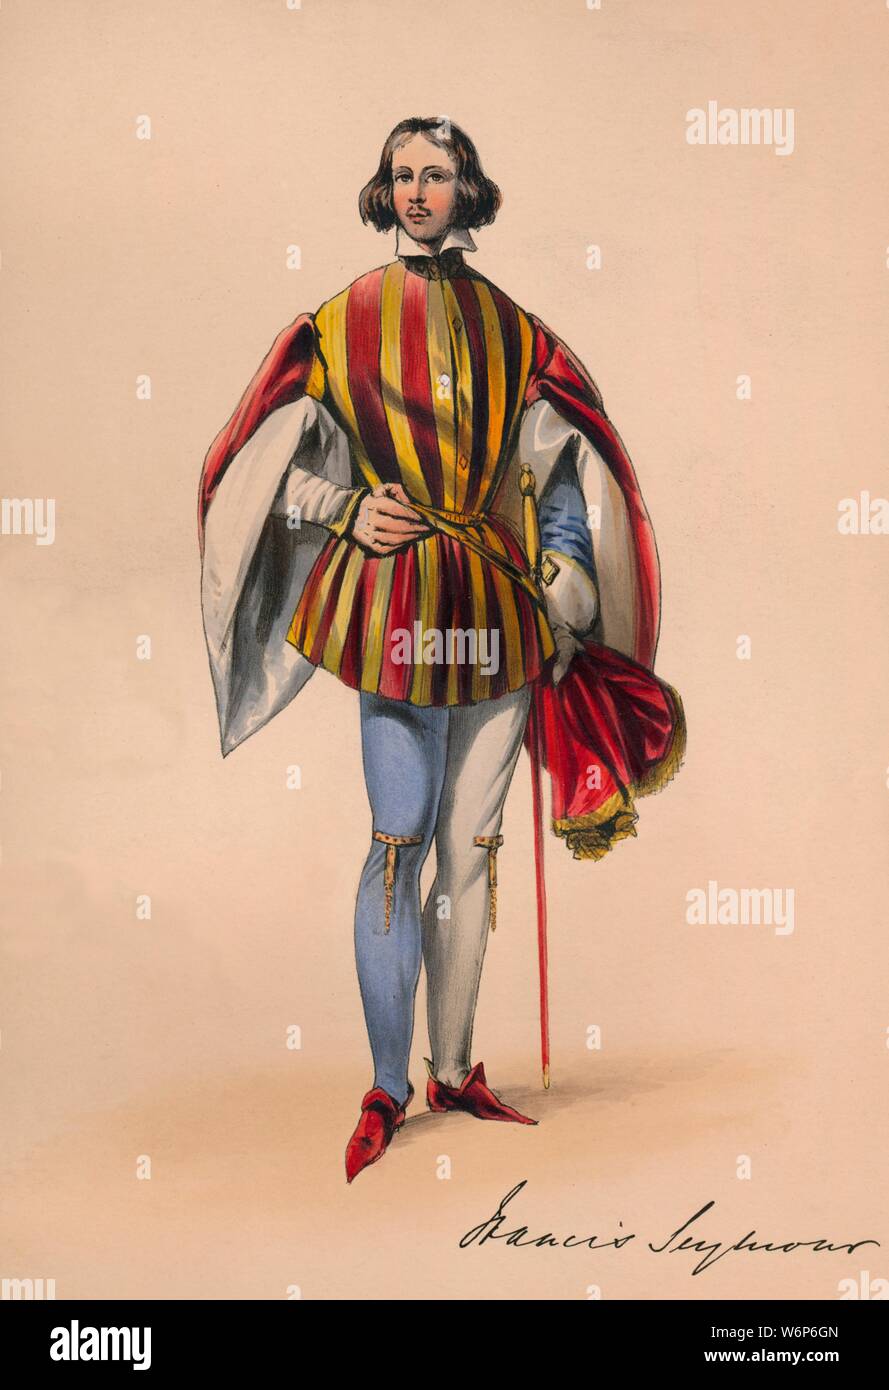 Francis Seymour in costume for Queen Victoria's Bal Costum&#xe9;, May 12 1842, (1843). British courtier, army officer and politician Francis Seymour, 5th Marquess of Hertford (1812-1884) in Plantagenet dress. Members of the Royal Household were expected to wear dress of the Plantagenet period (c1154-1485), although other guests could wear costumes of their own choosing. The costumes were designed under the supervision of James Robinson Planch&#xe9; and were specifically intended to give work to the declining Spitalfields silk industry. The ball of 1842, held at Buckingham Palace in London, was Stock Photo